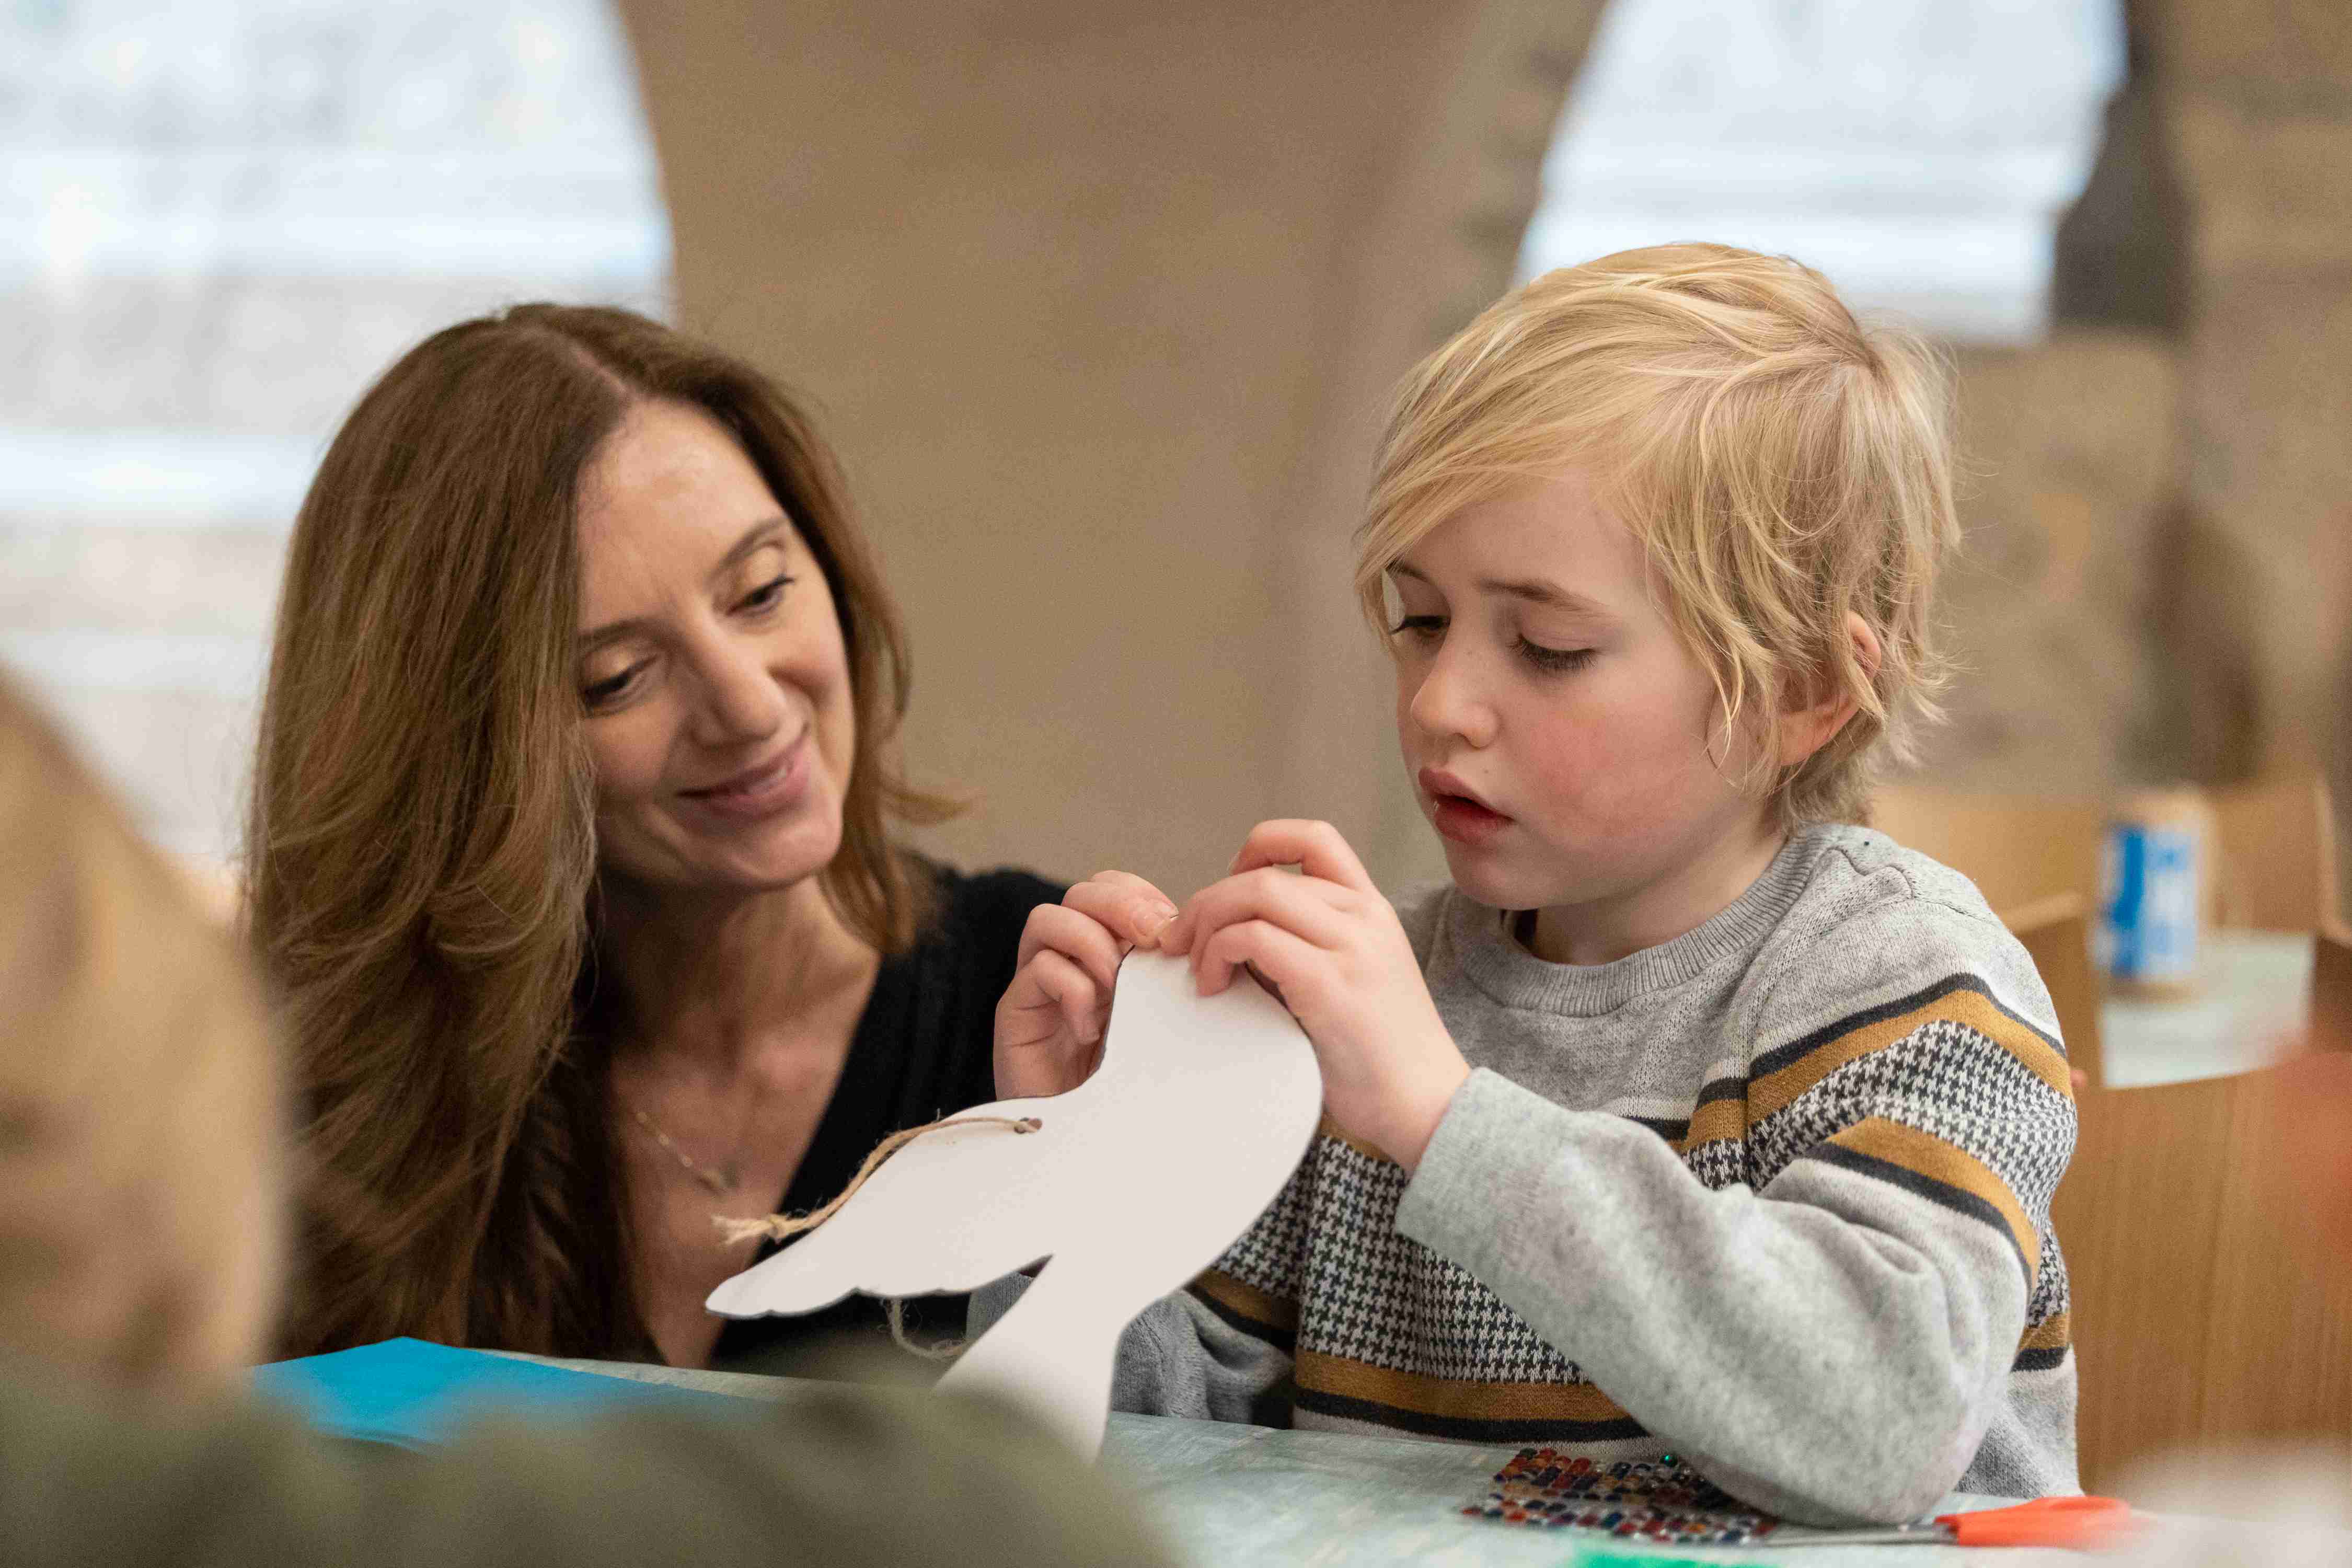 A woman talks to a child doing a craft activity